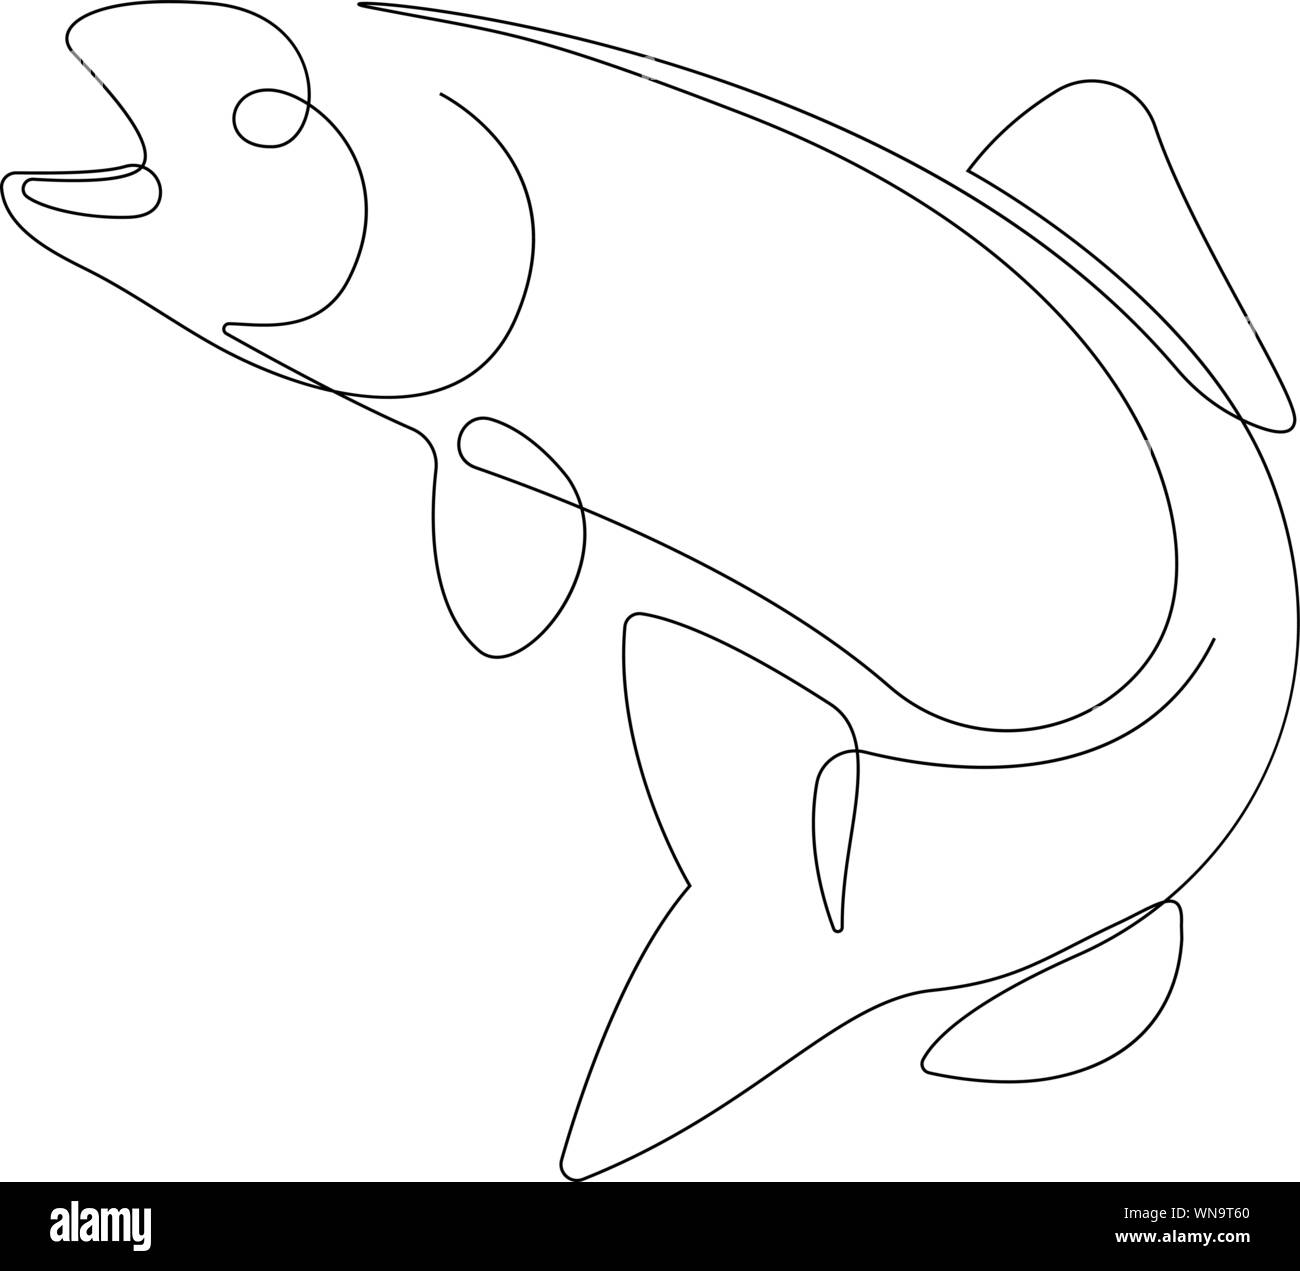 One single line drawing of big salmon or trout for logo identity